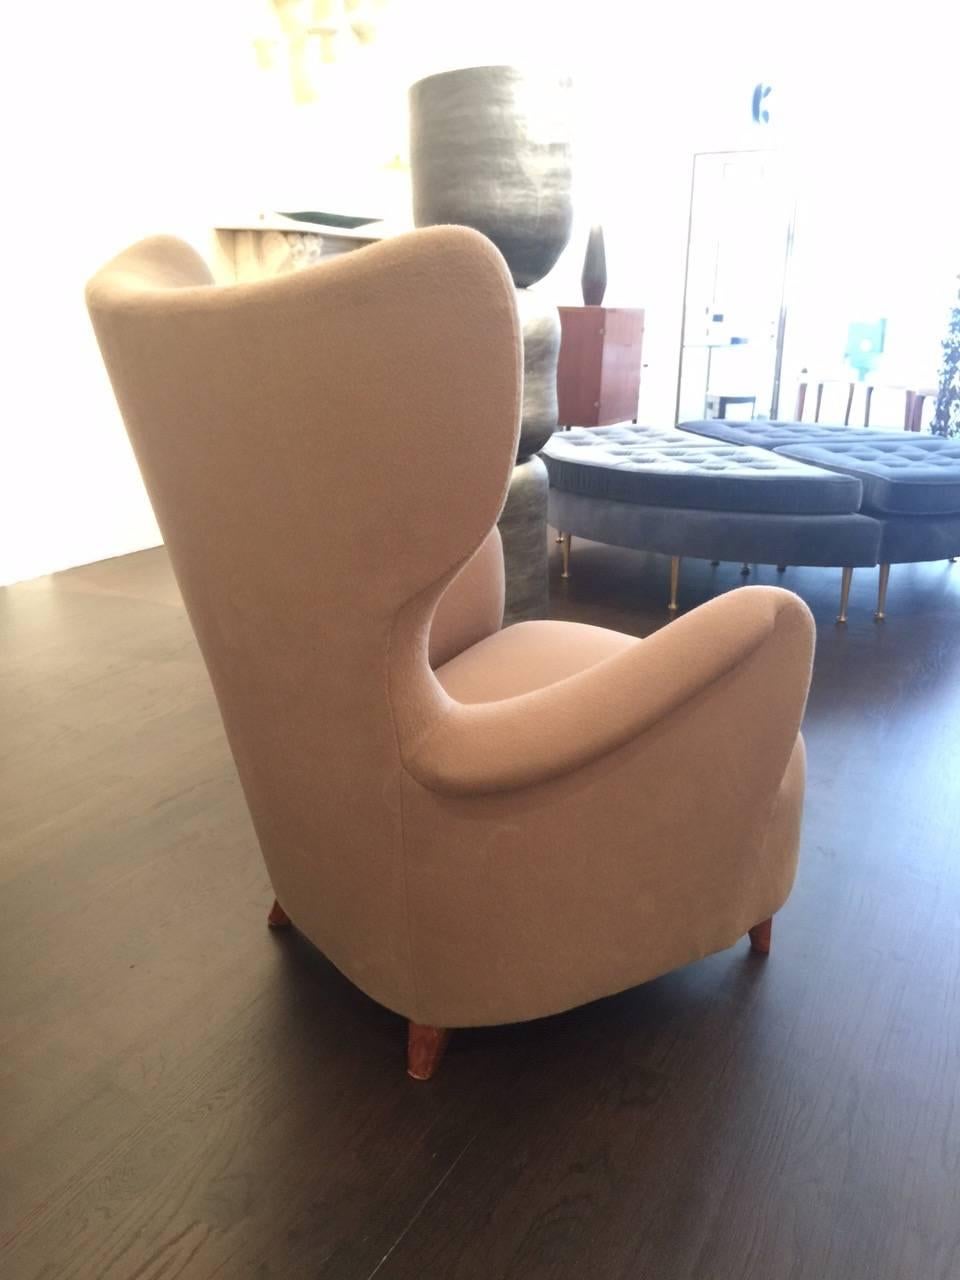 Gustav Axel Berg, Sculptural lounge chair made in Sweden, circa 1950.
Very comfortable, reupholstered in new cashmere upholstery, excellent condition,

Measures: 32